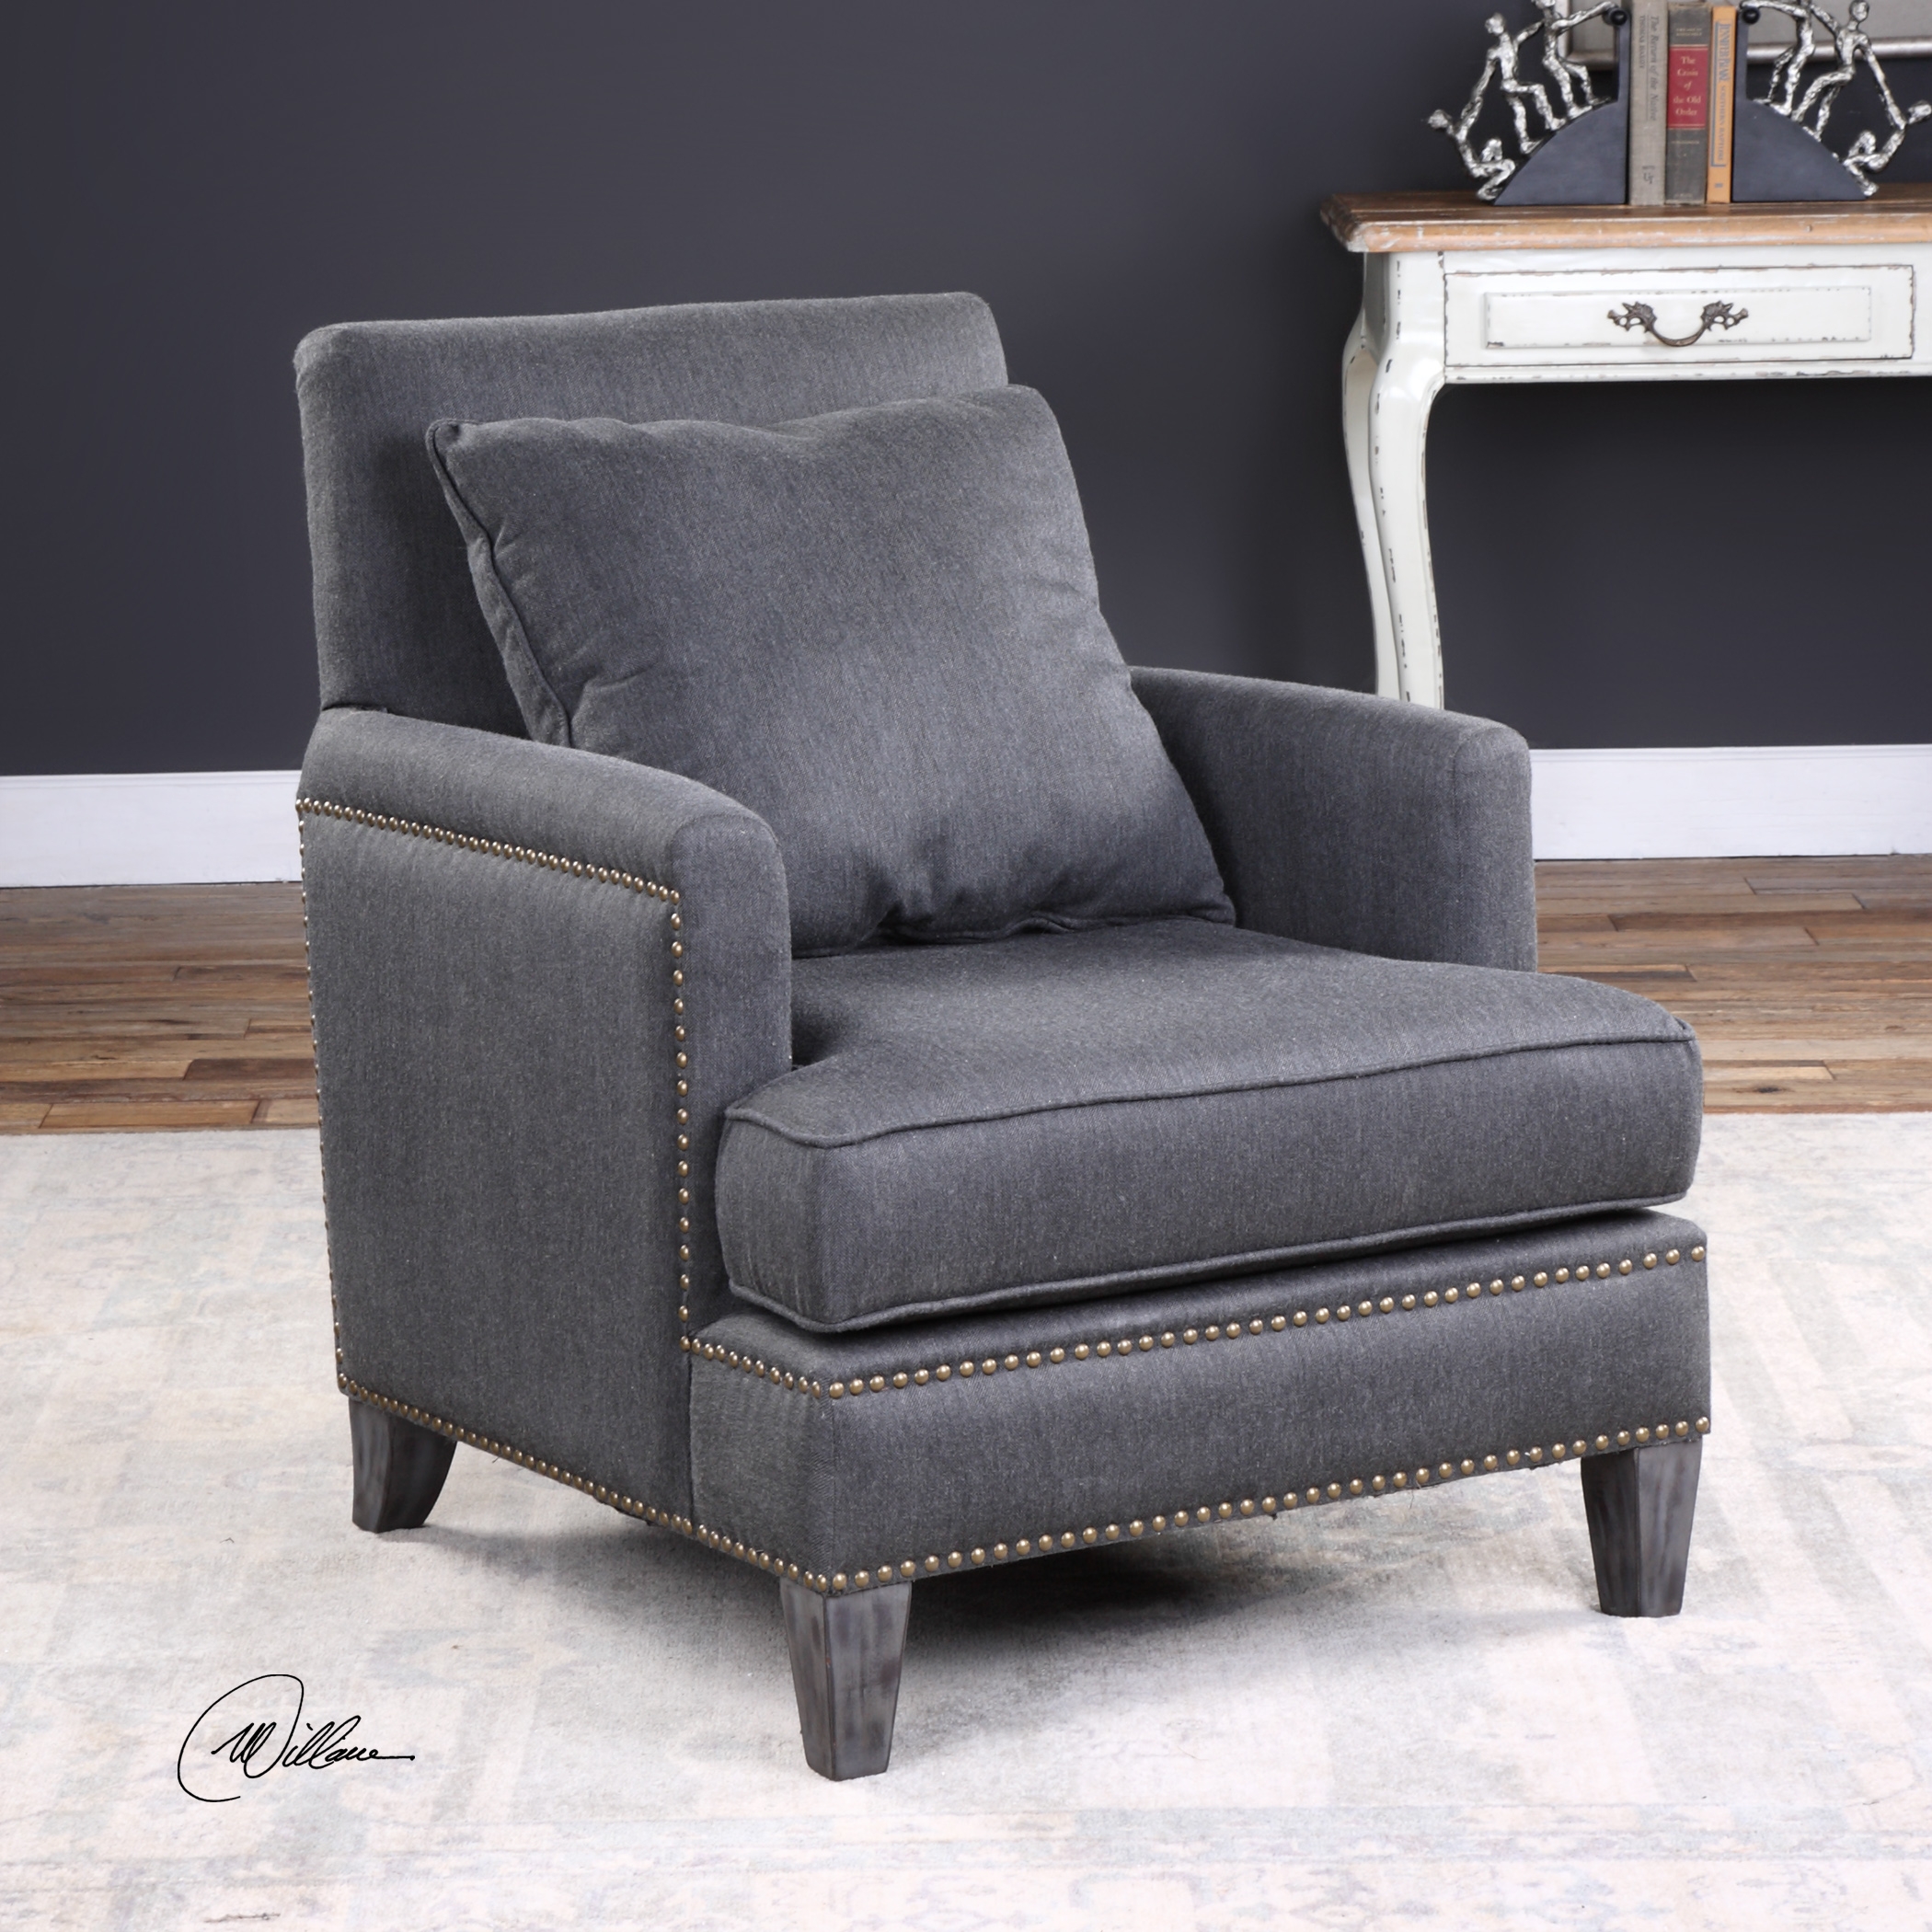 Connolly Charcoal Armchair - Image 1